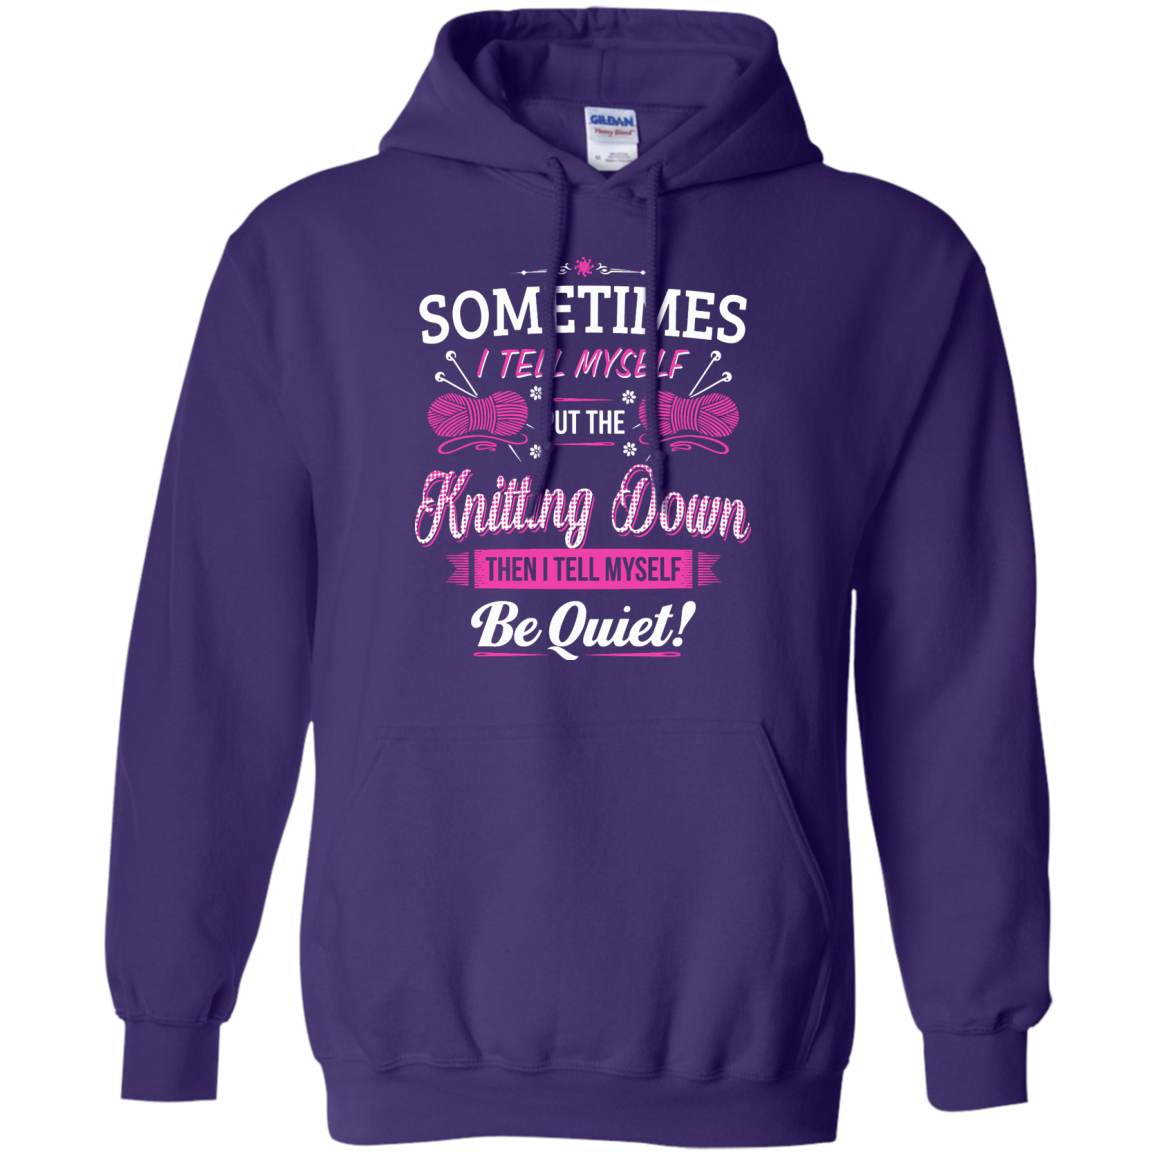 Put the Knitting Down Pullover Hoodies - Crafter4Life - 9